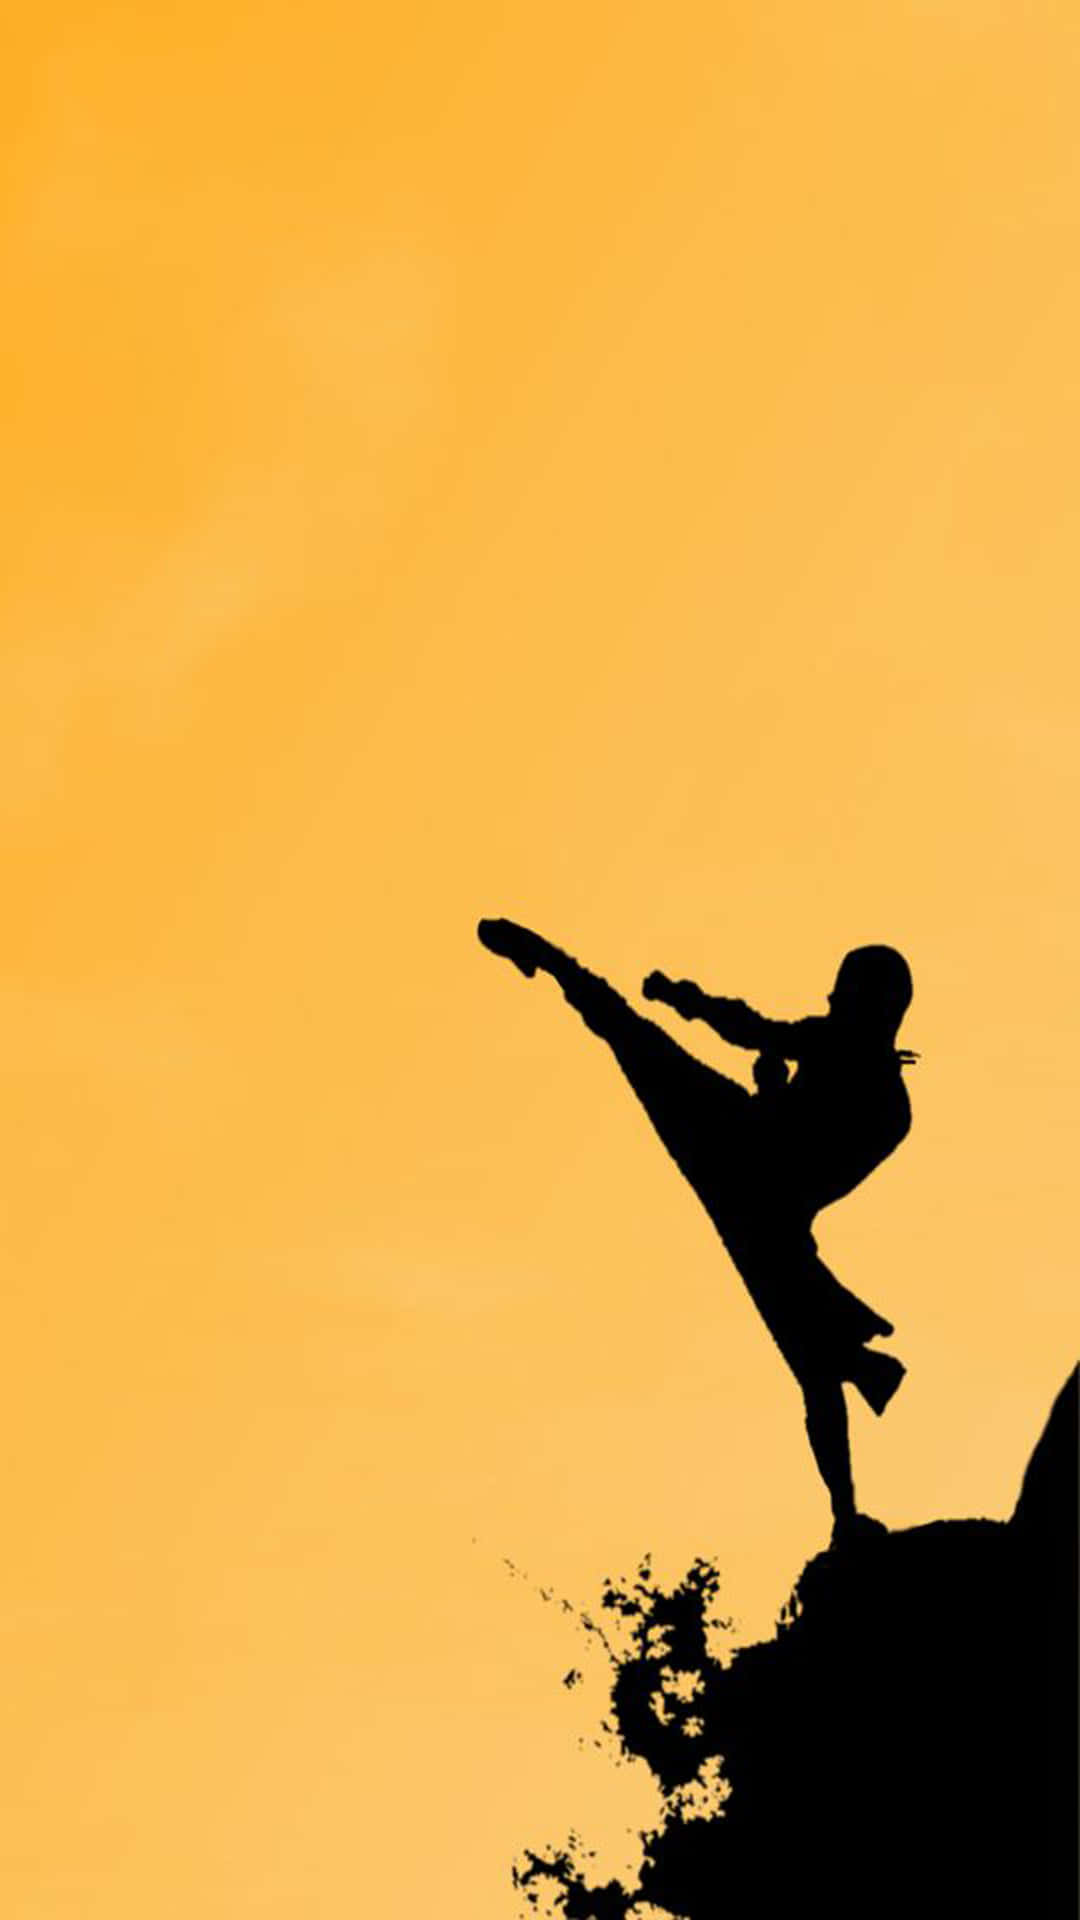 A Silhouette Of A Man Doing A Martial Kick